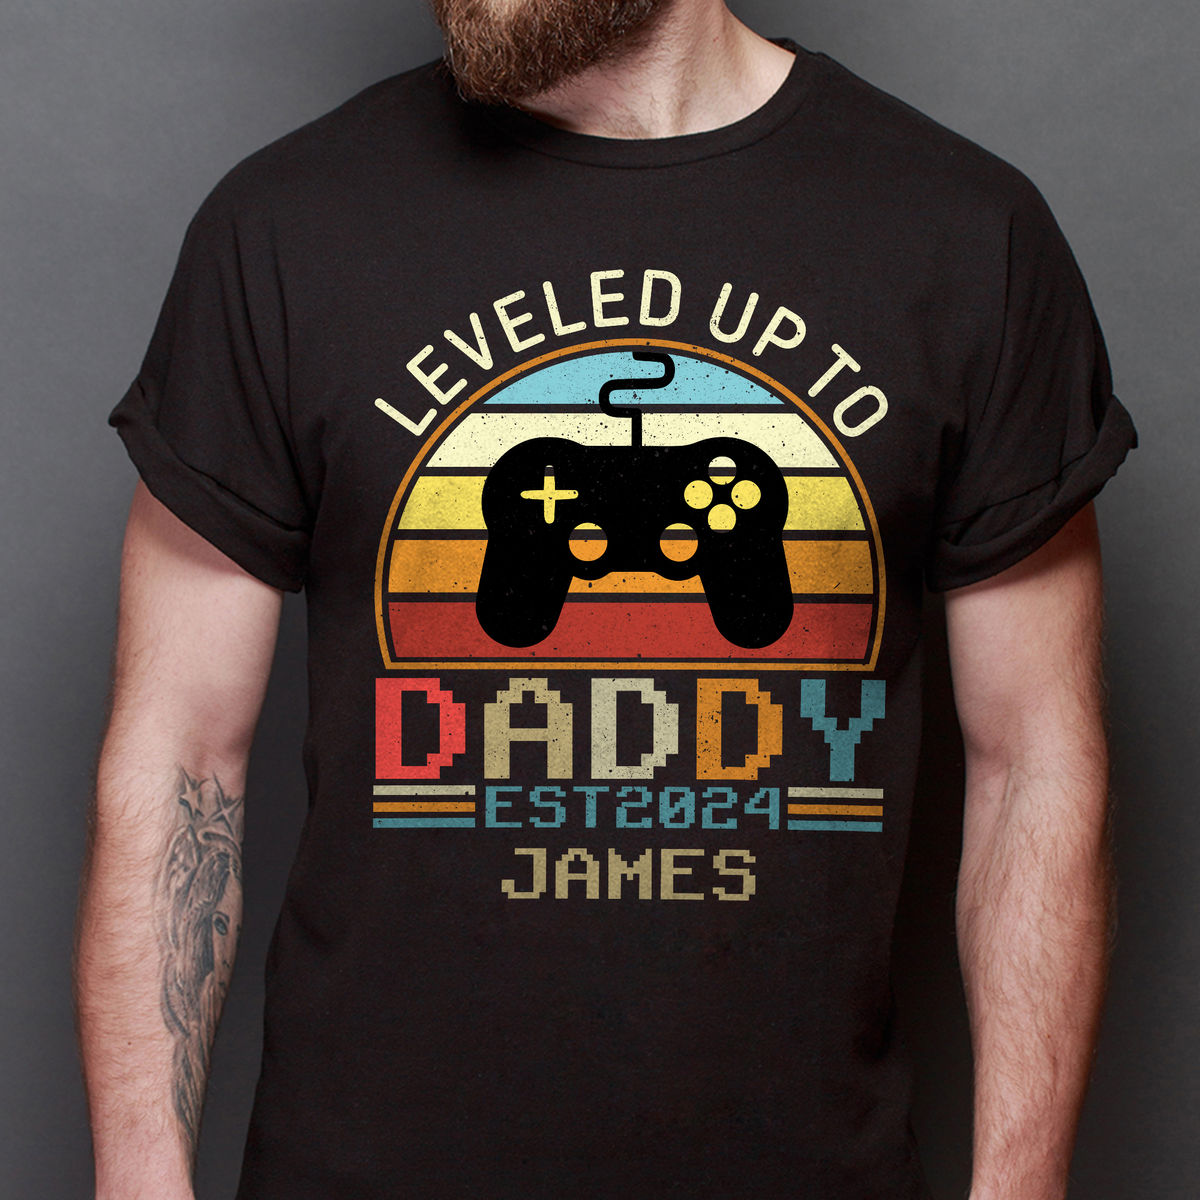 Personalized Shirt - Father's Day Gifts - Leveled Up To Daddy - New Dad Gifts - Gifts For Dad - Father's Day Shirts